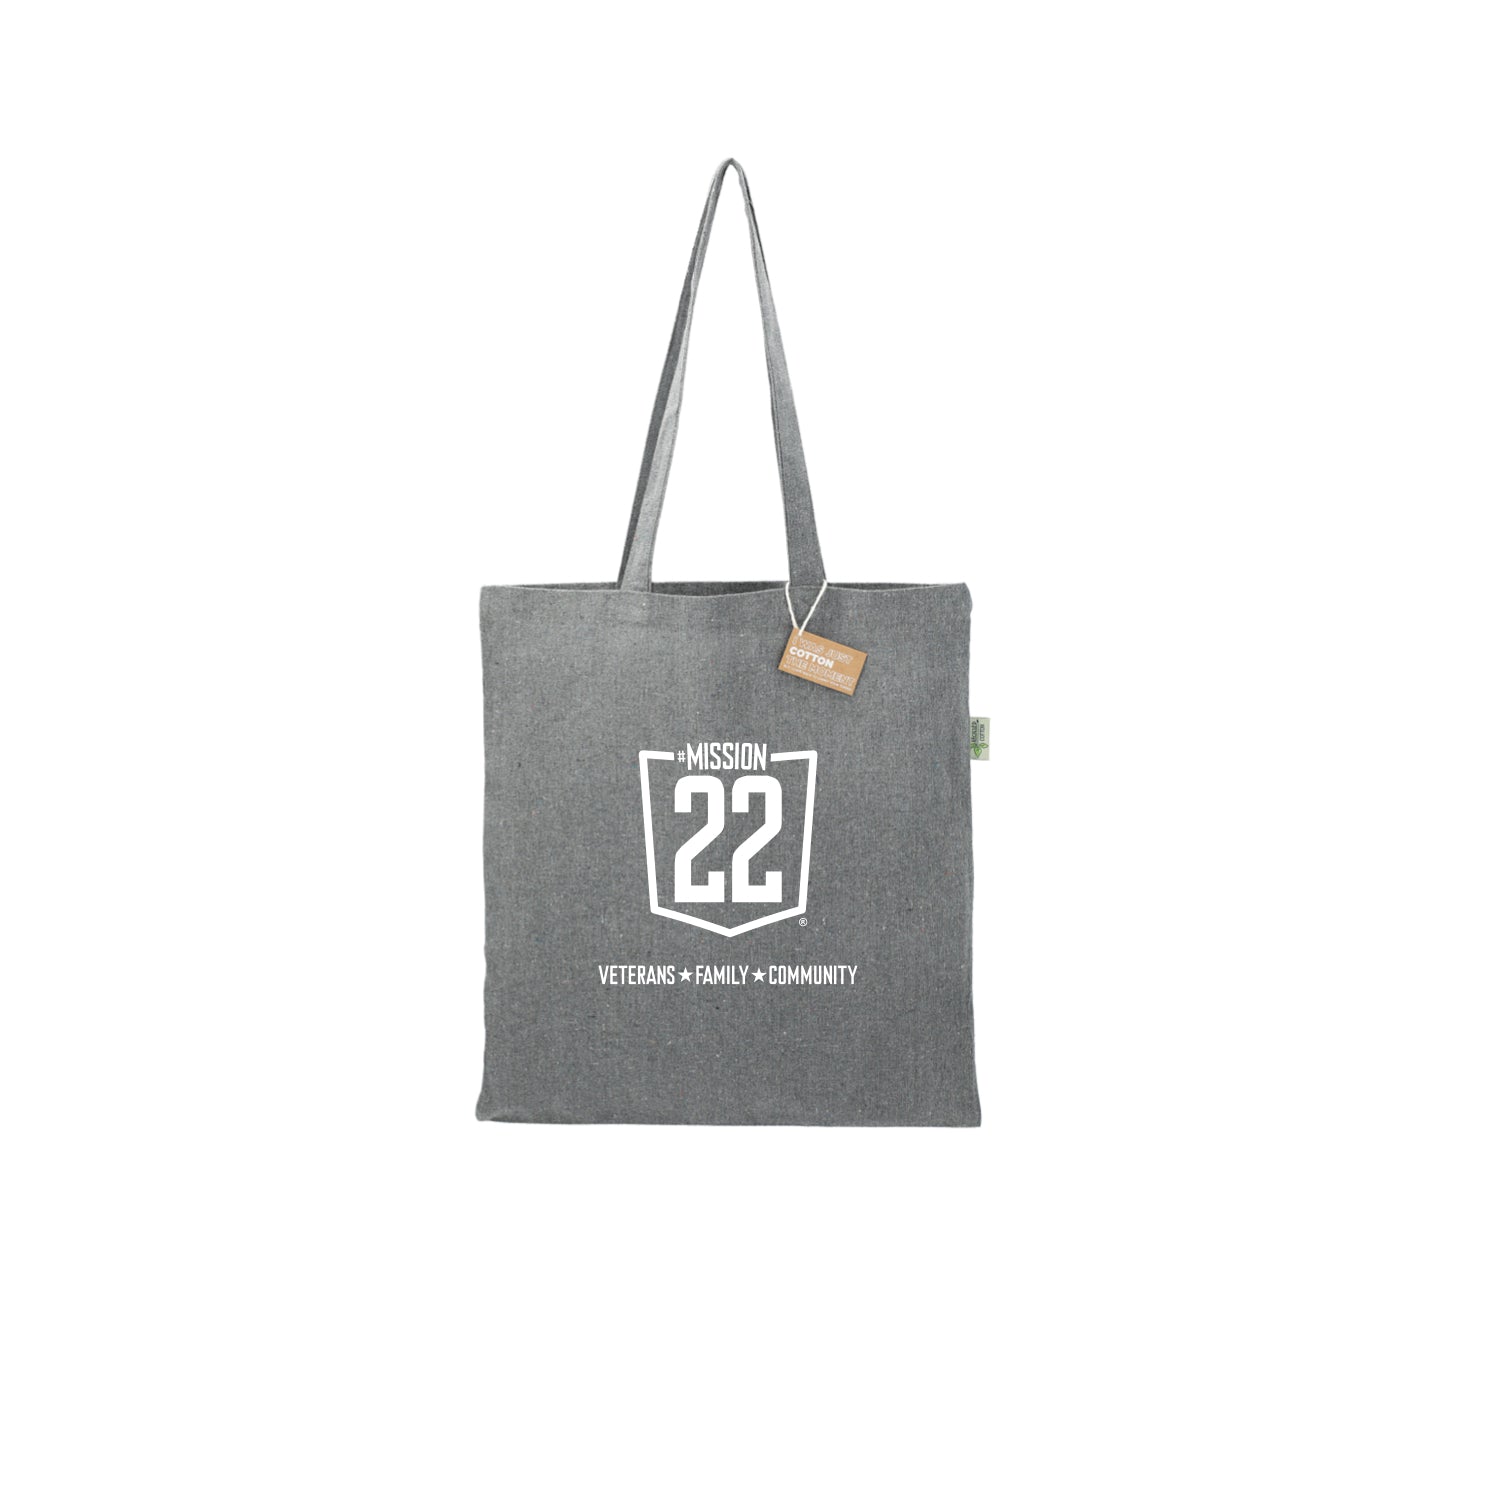 Product Image of Mission 22 Recycled Cotton Tote #1